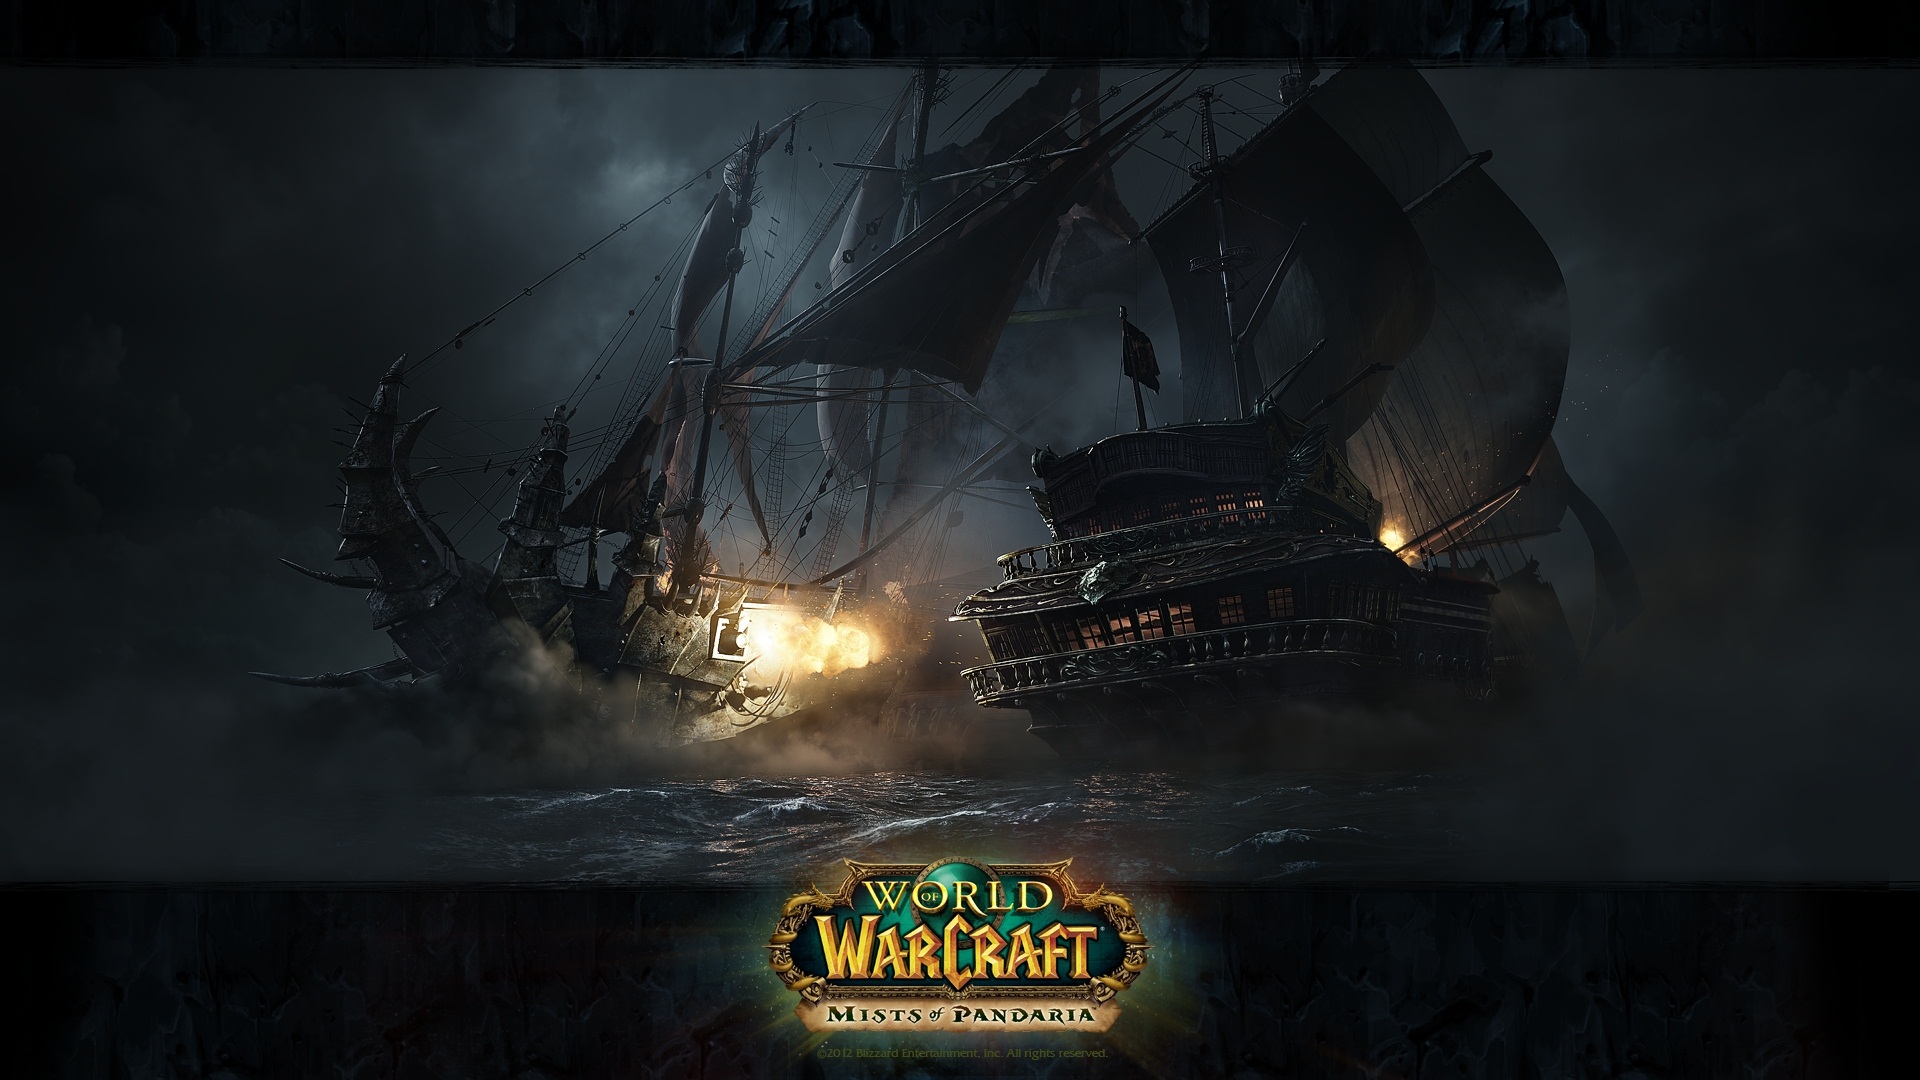 World of Warcraft: Mists of Pandaria HD wallpapers #5 - 1920x1080